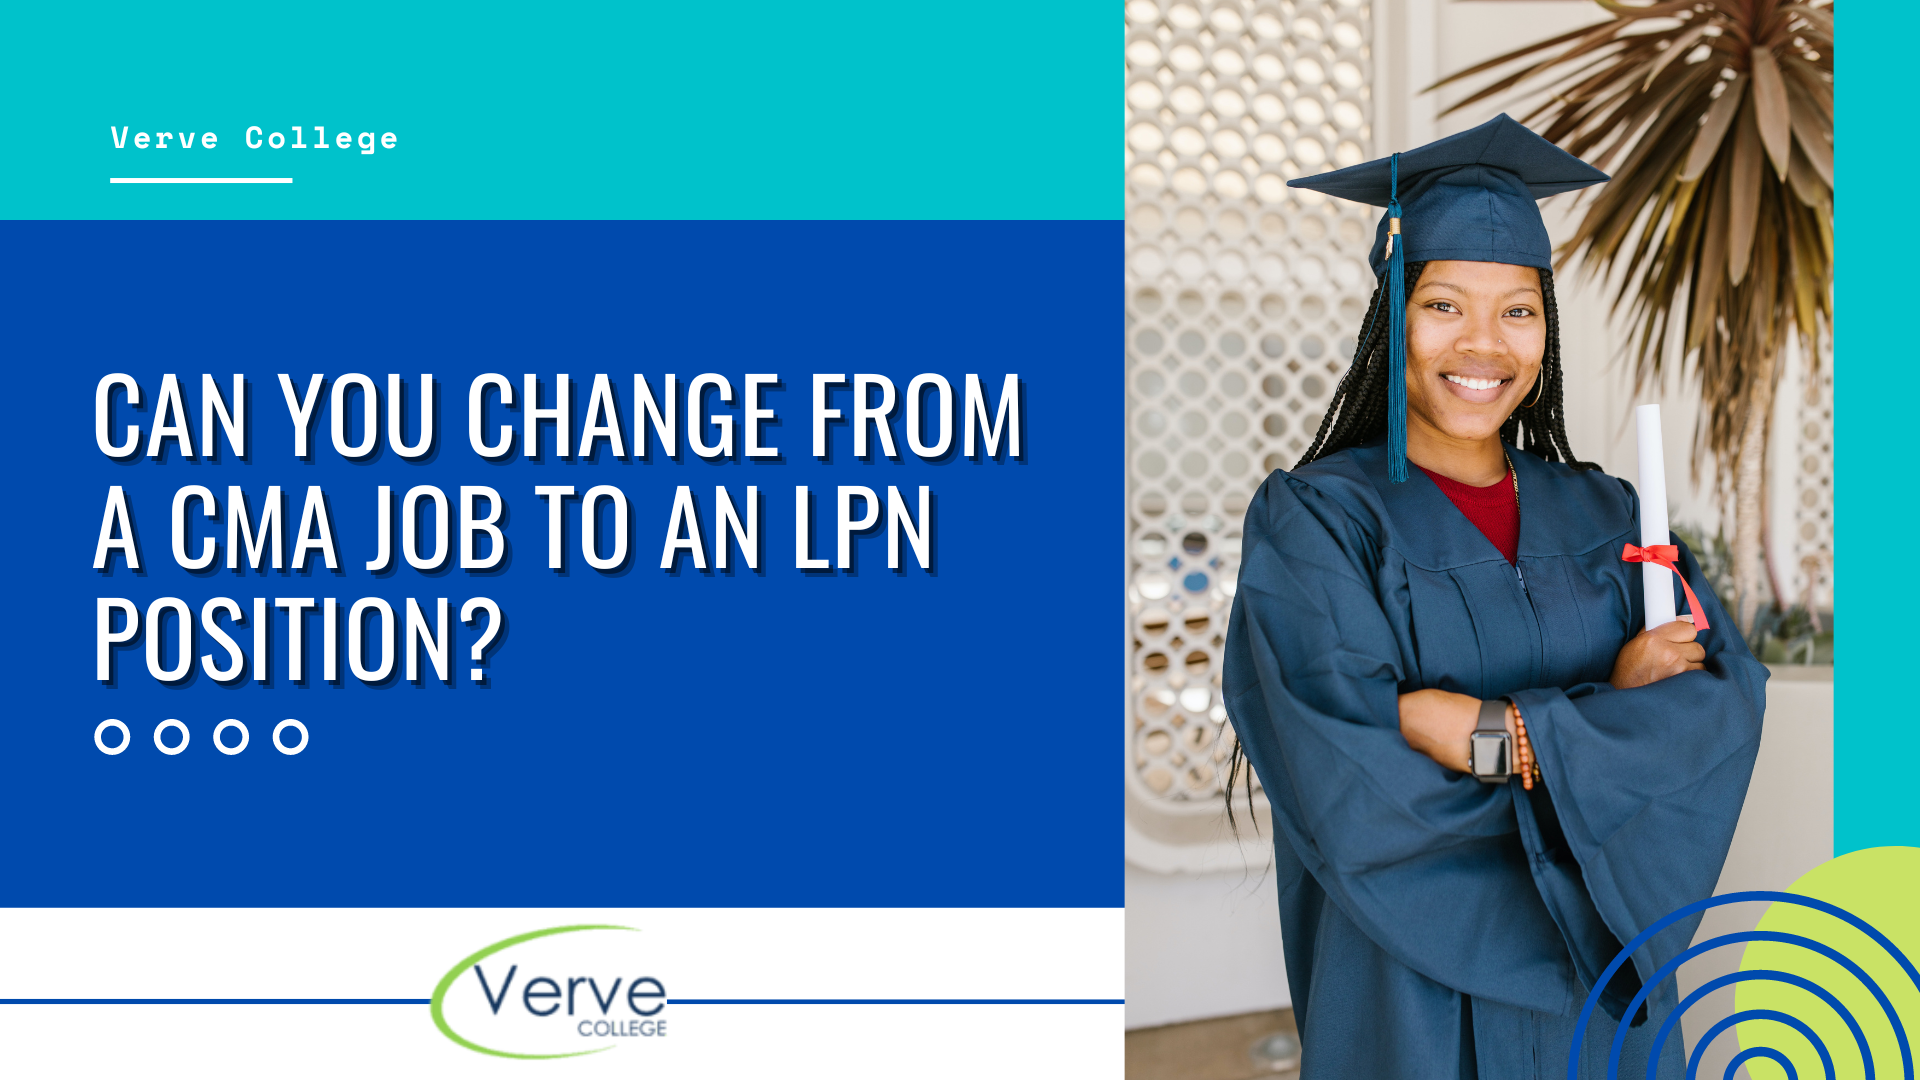 Can You Change from a CMA Job to an LPN Position?